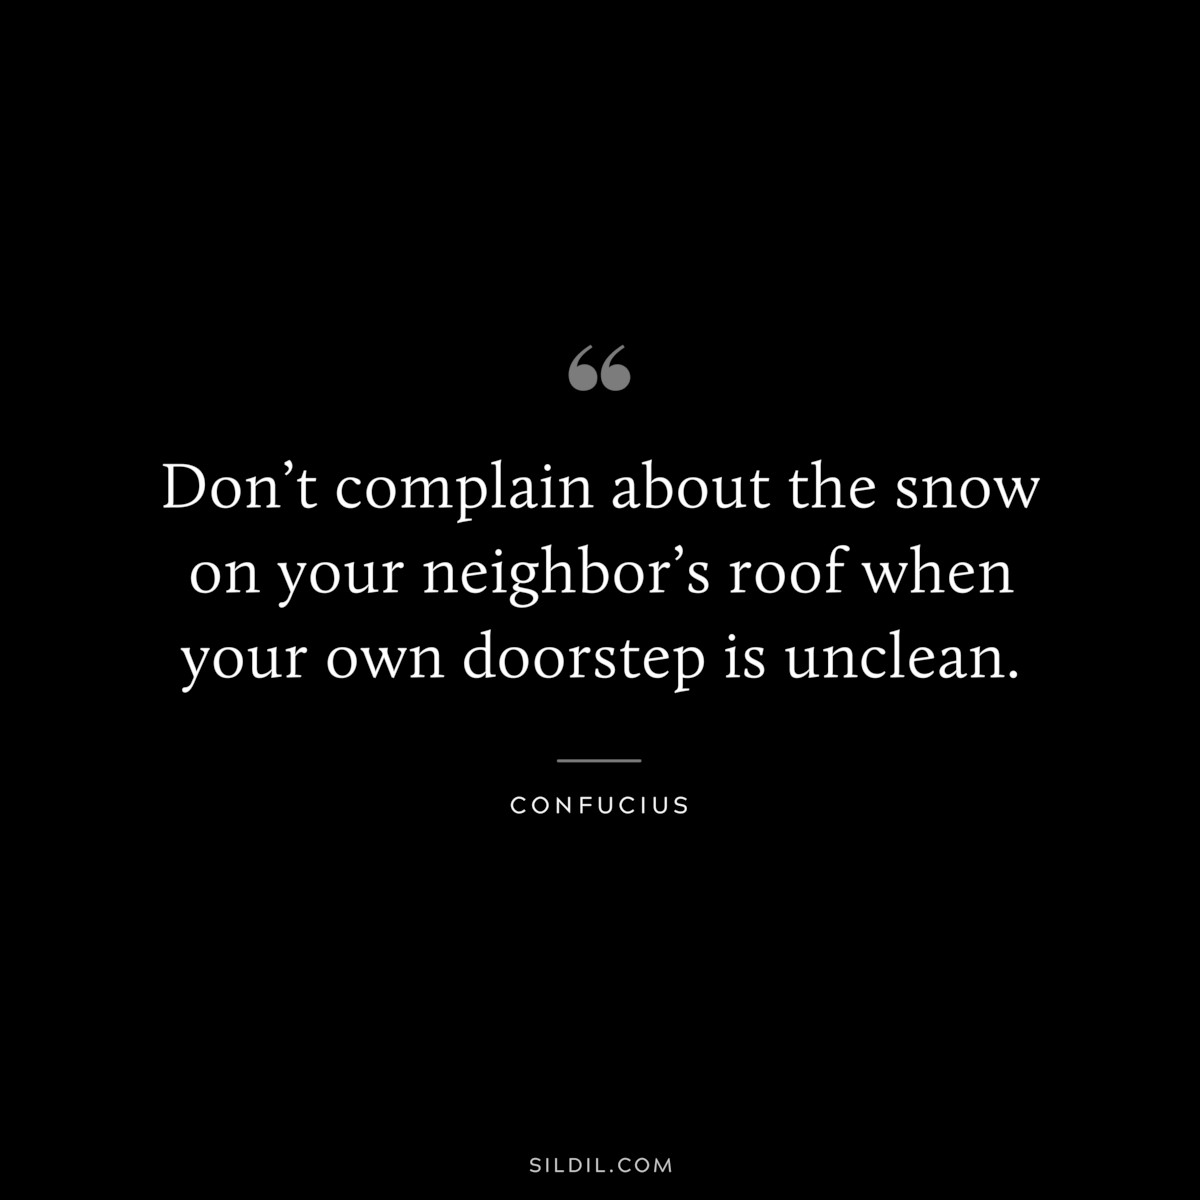 Don’t complain about the snow on your neighbor’s roof when your own doorstep is unclean. ― Confucius